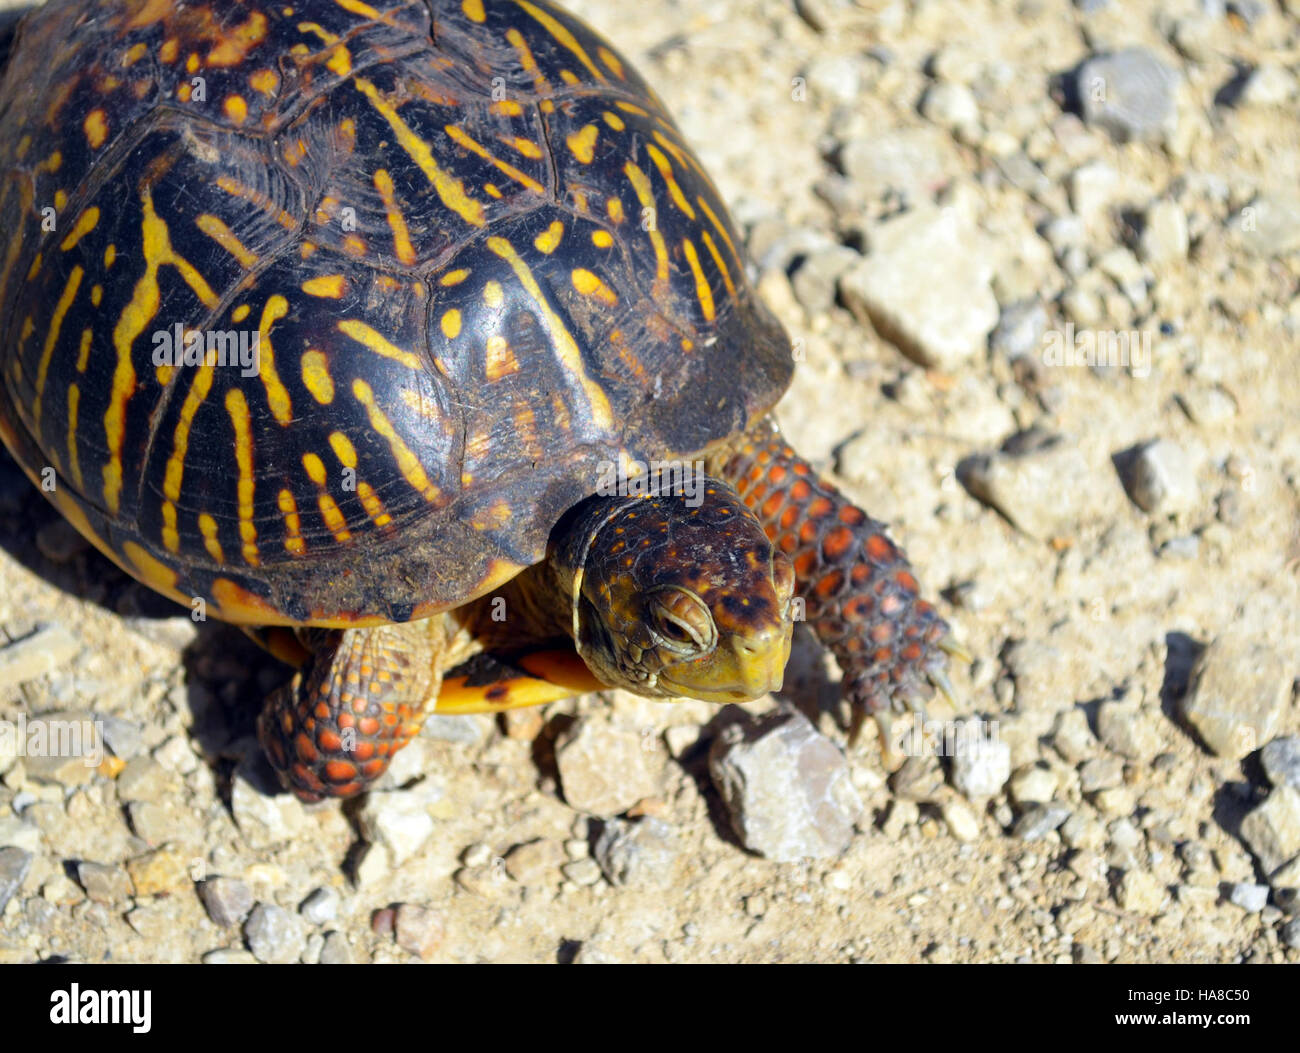 usfwsmidwest 19563842258 Ornate box turtle crossing the road Stock Photo